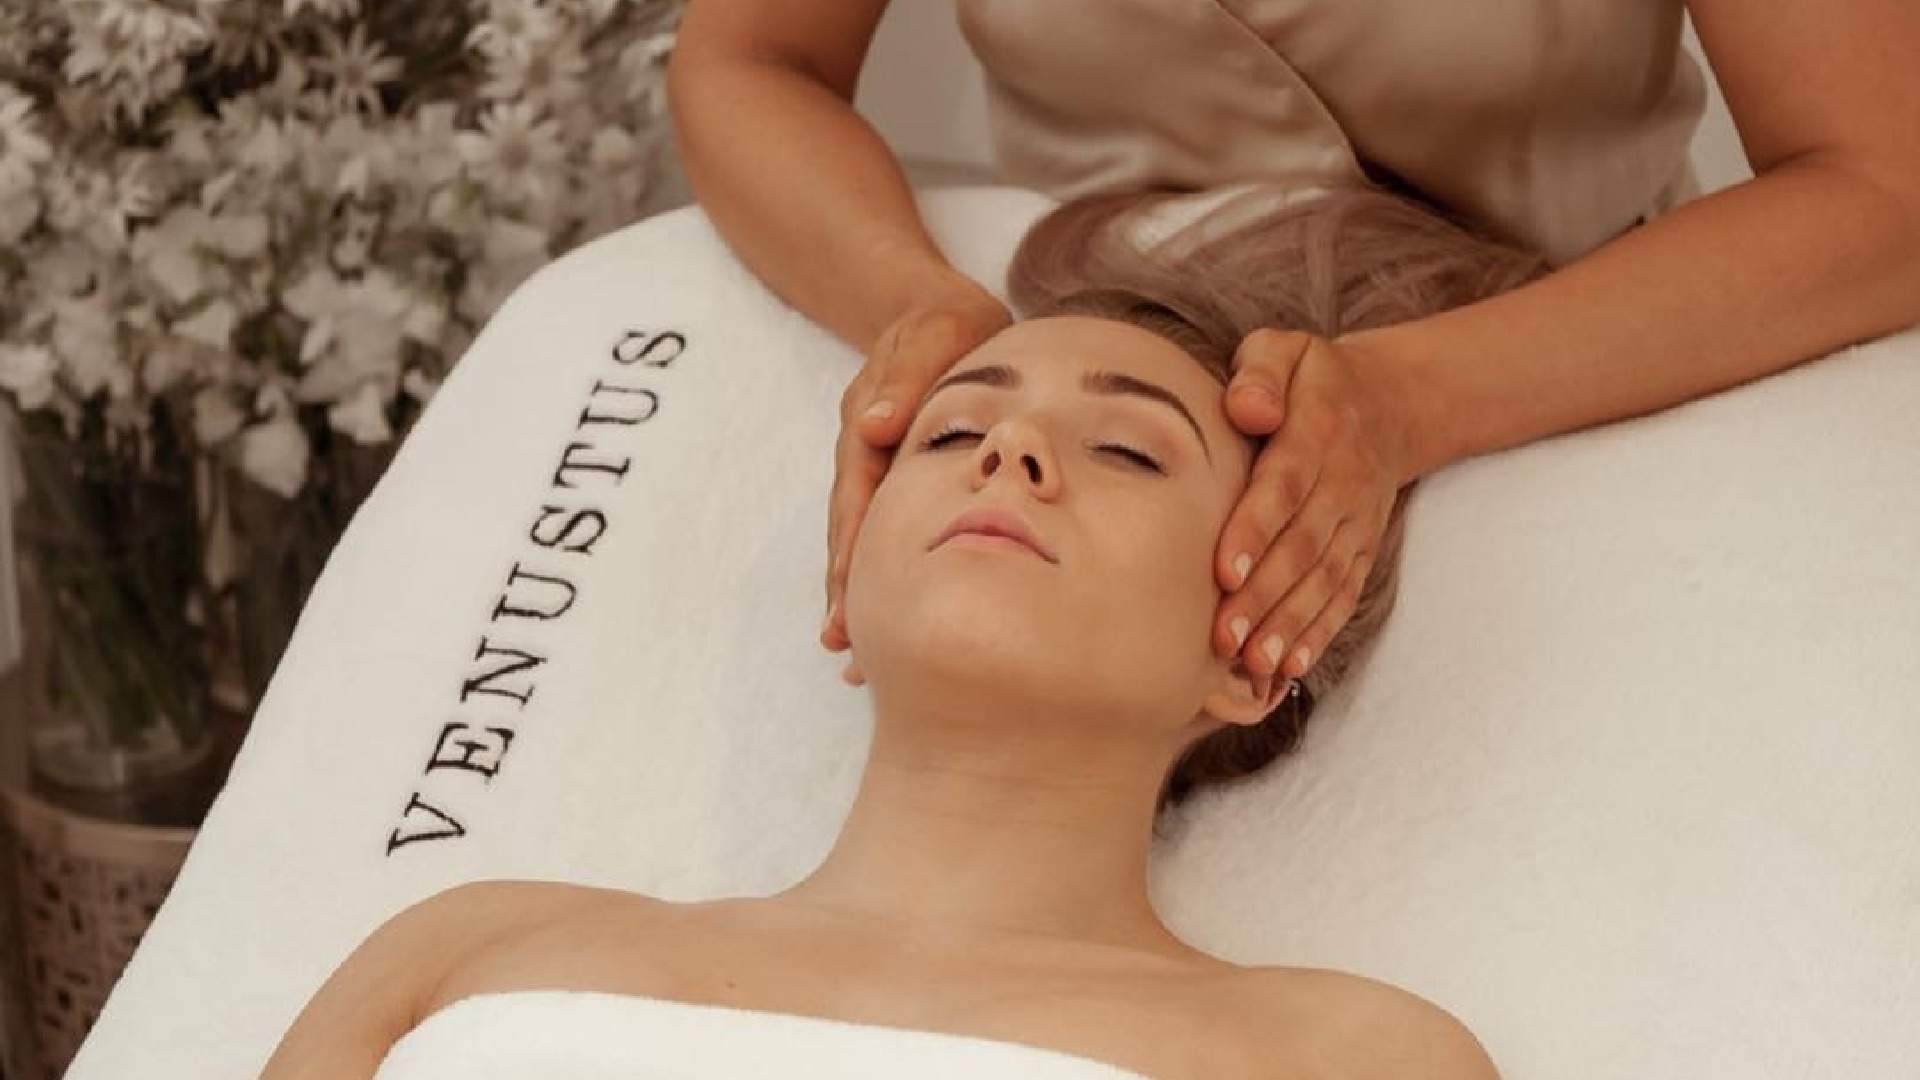 A woman receiving a head massage at venustus beauty - one of the best day spa experiences in sydney